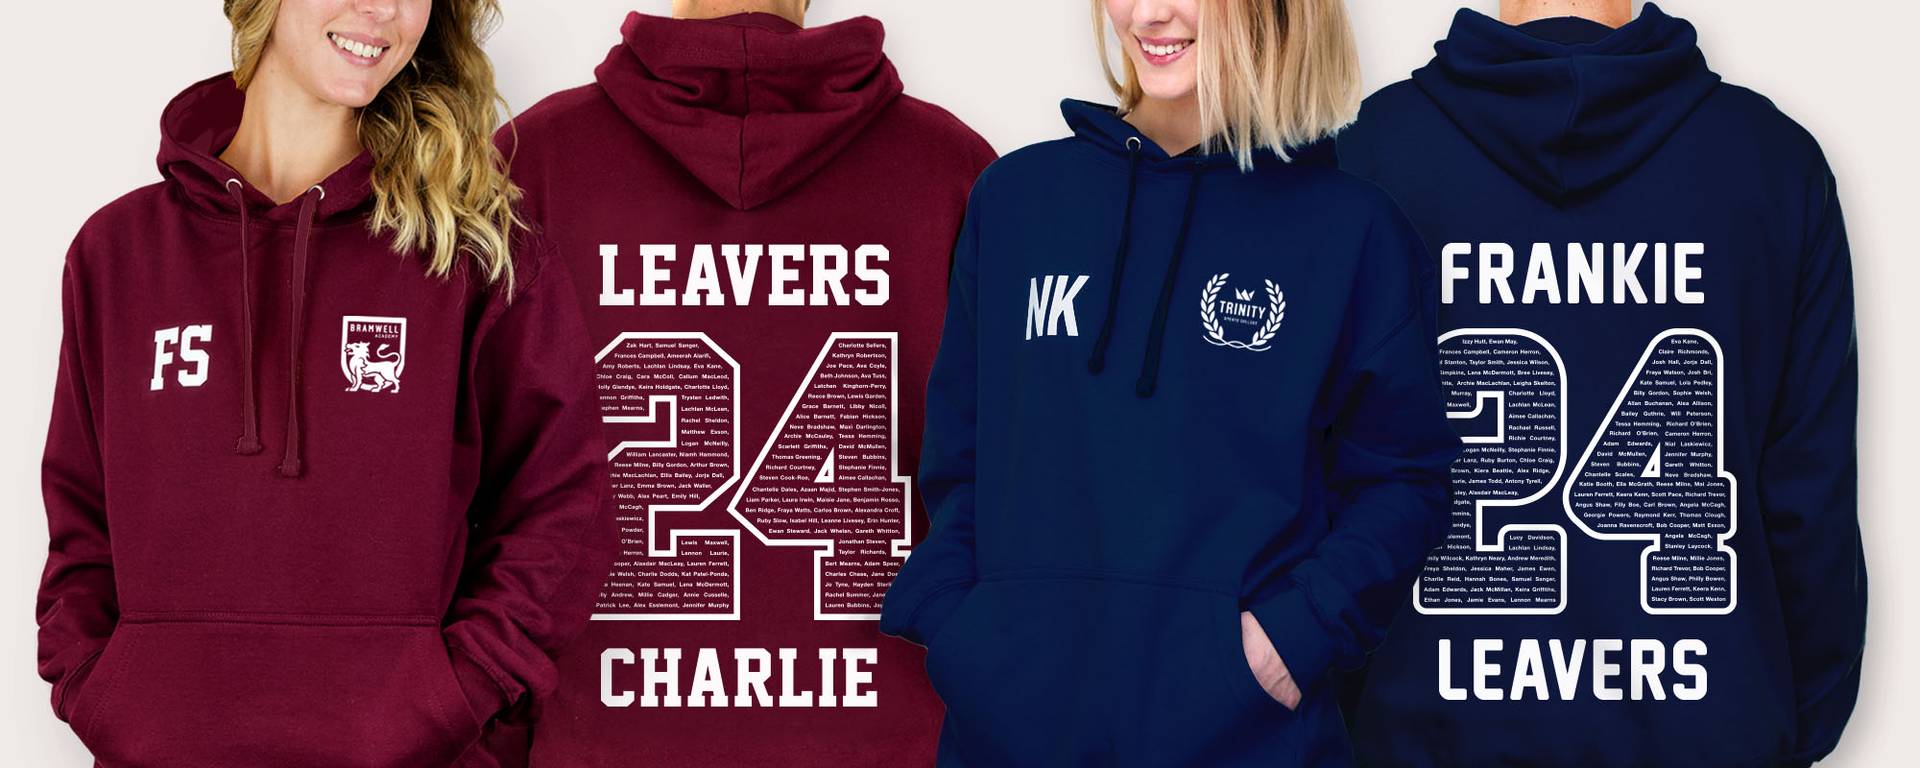 Students in colourful school leavers hoodies with a large 24 printed on the back